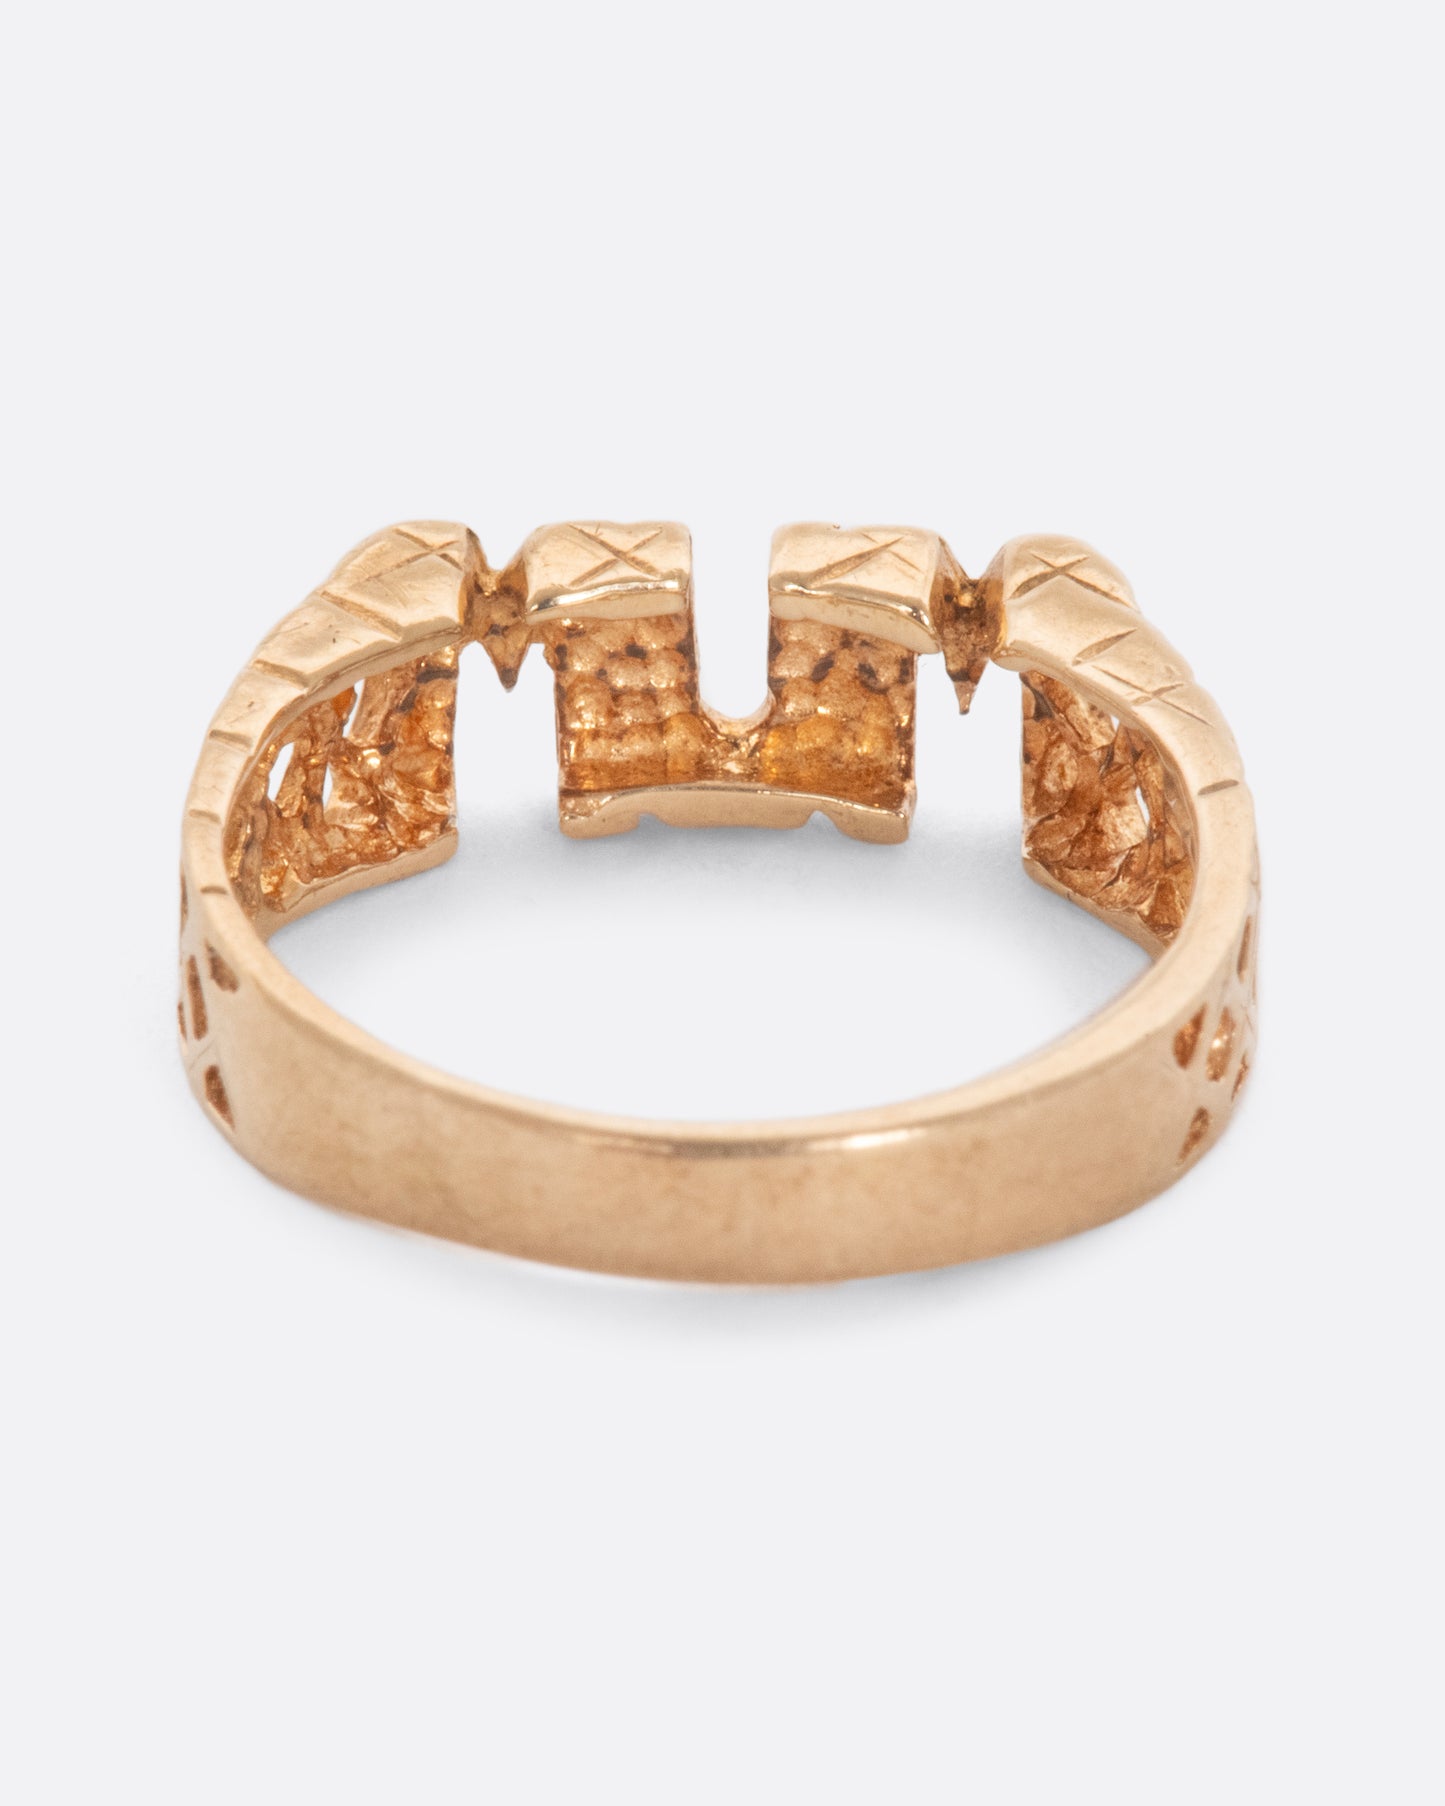 Gold ring that reads 'MUM' with crosshatch retail on either side. View from the back.